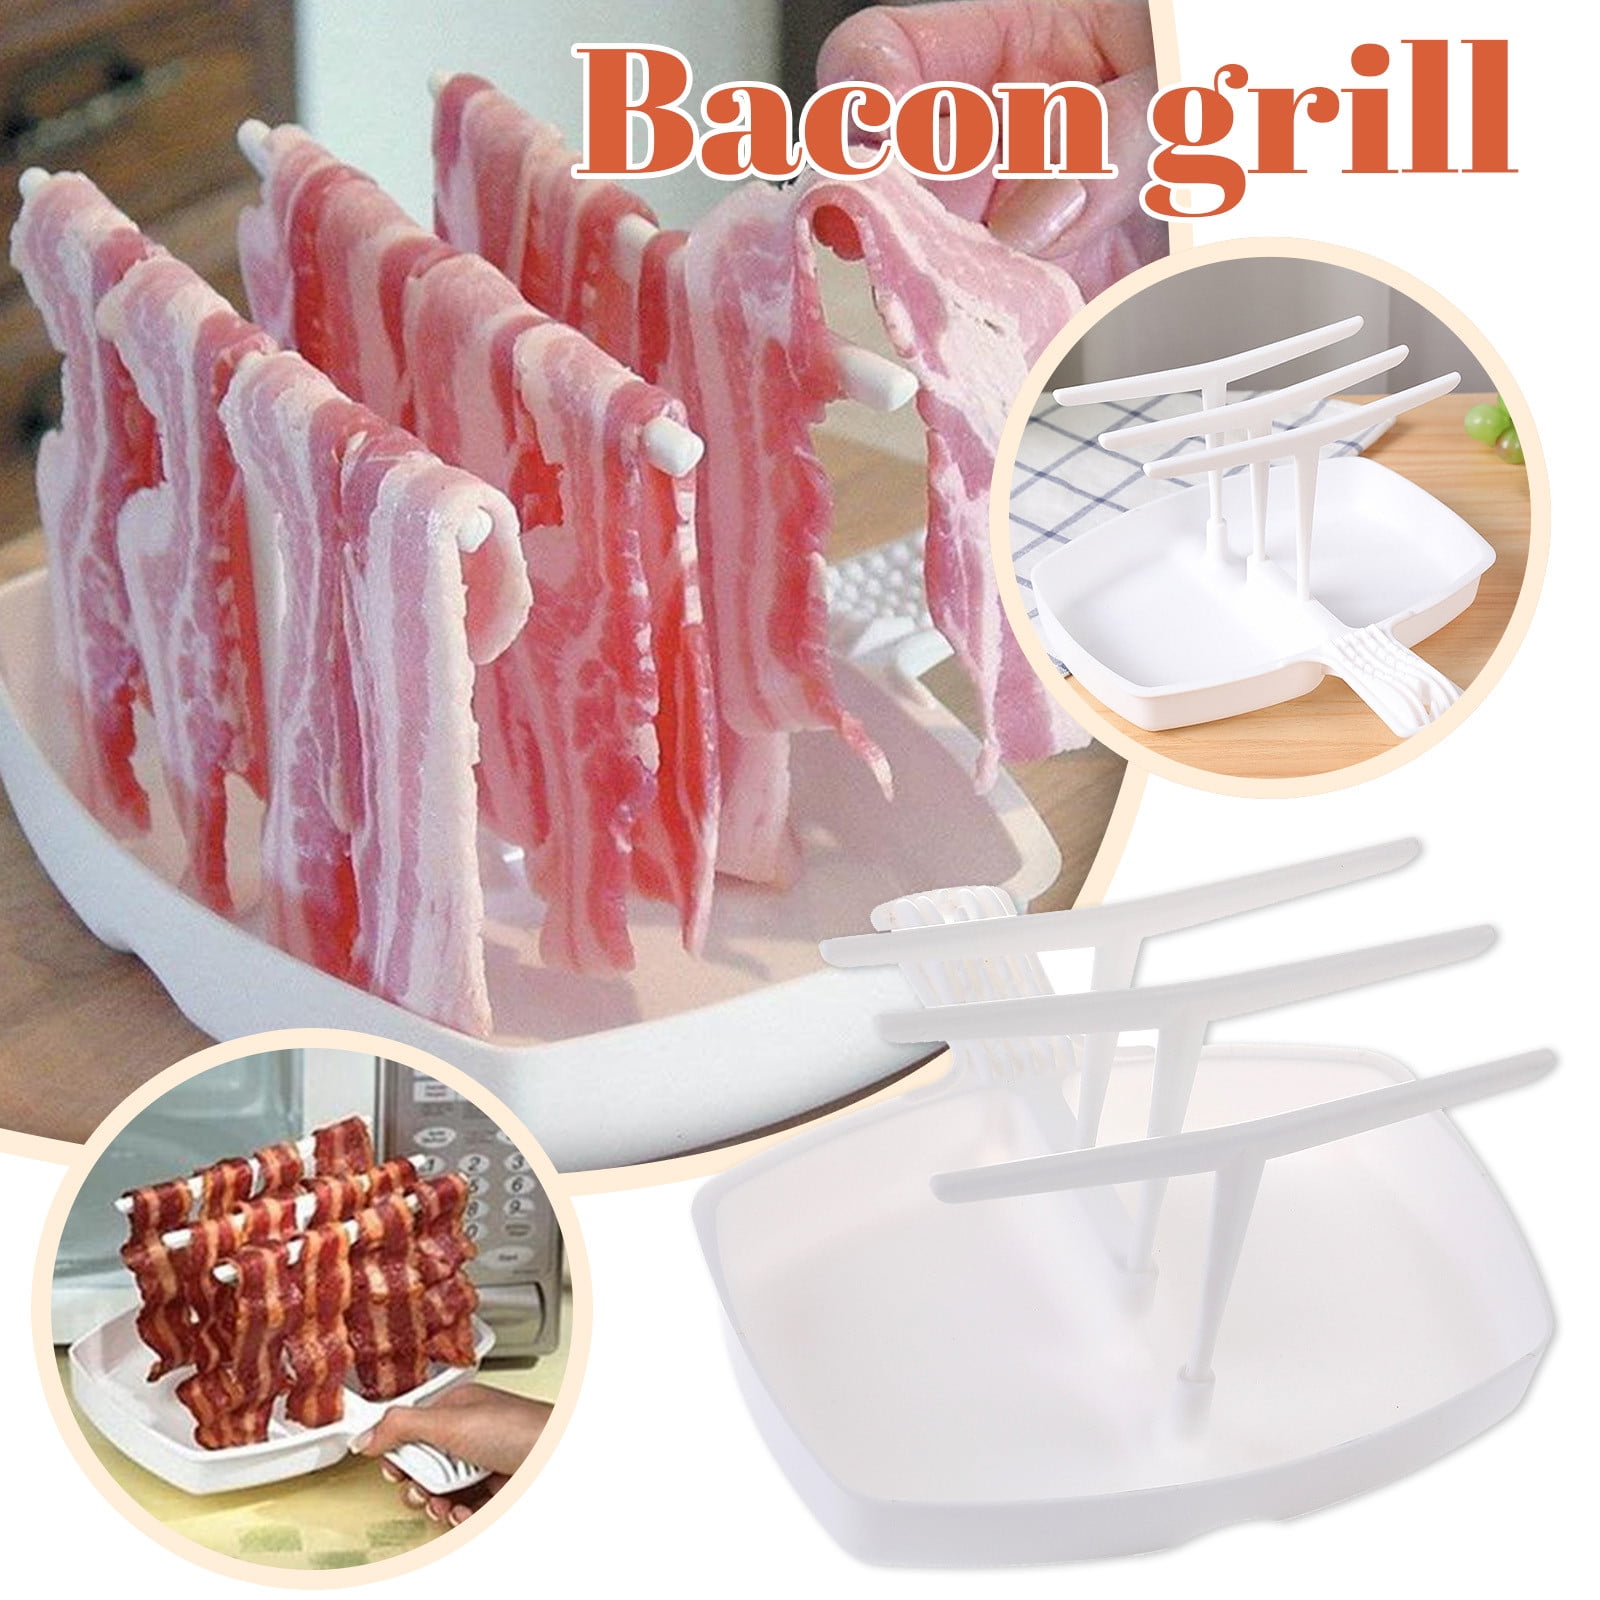 1pc Microwave Bacons Cooker, Tray Rack Bacons Cooking Tool For Crisp  Breakfast Meal, Portable Original Bacon Microwave Bacon Tray, Gadgets Kit  Accesso